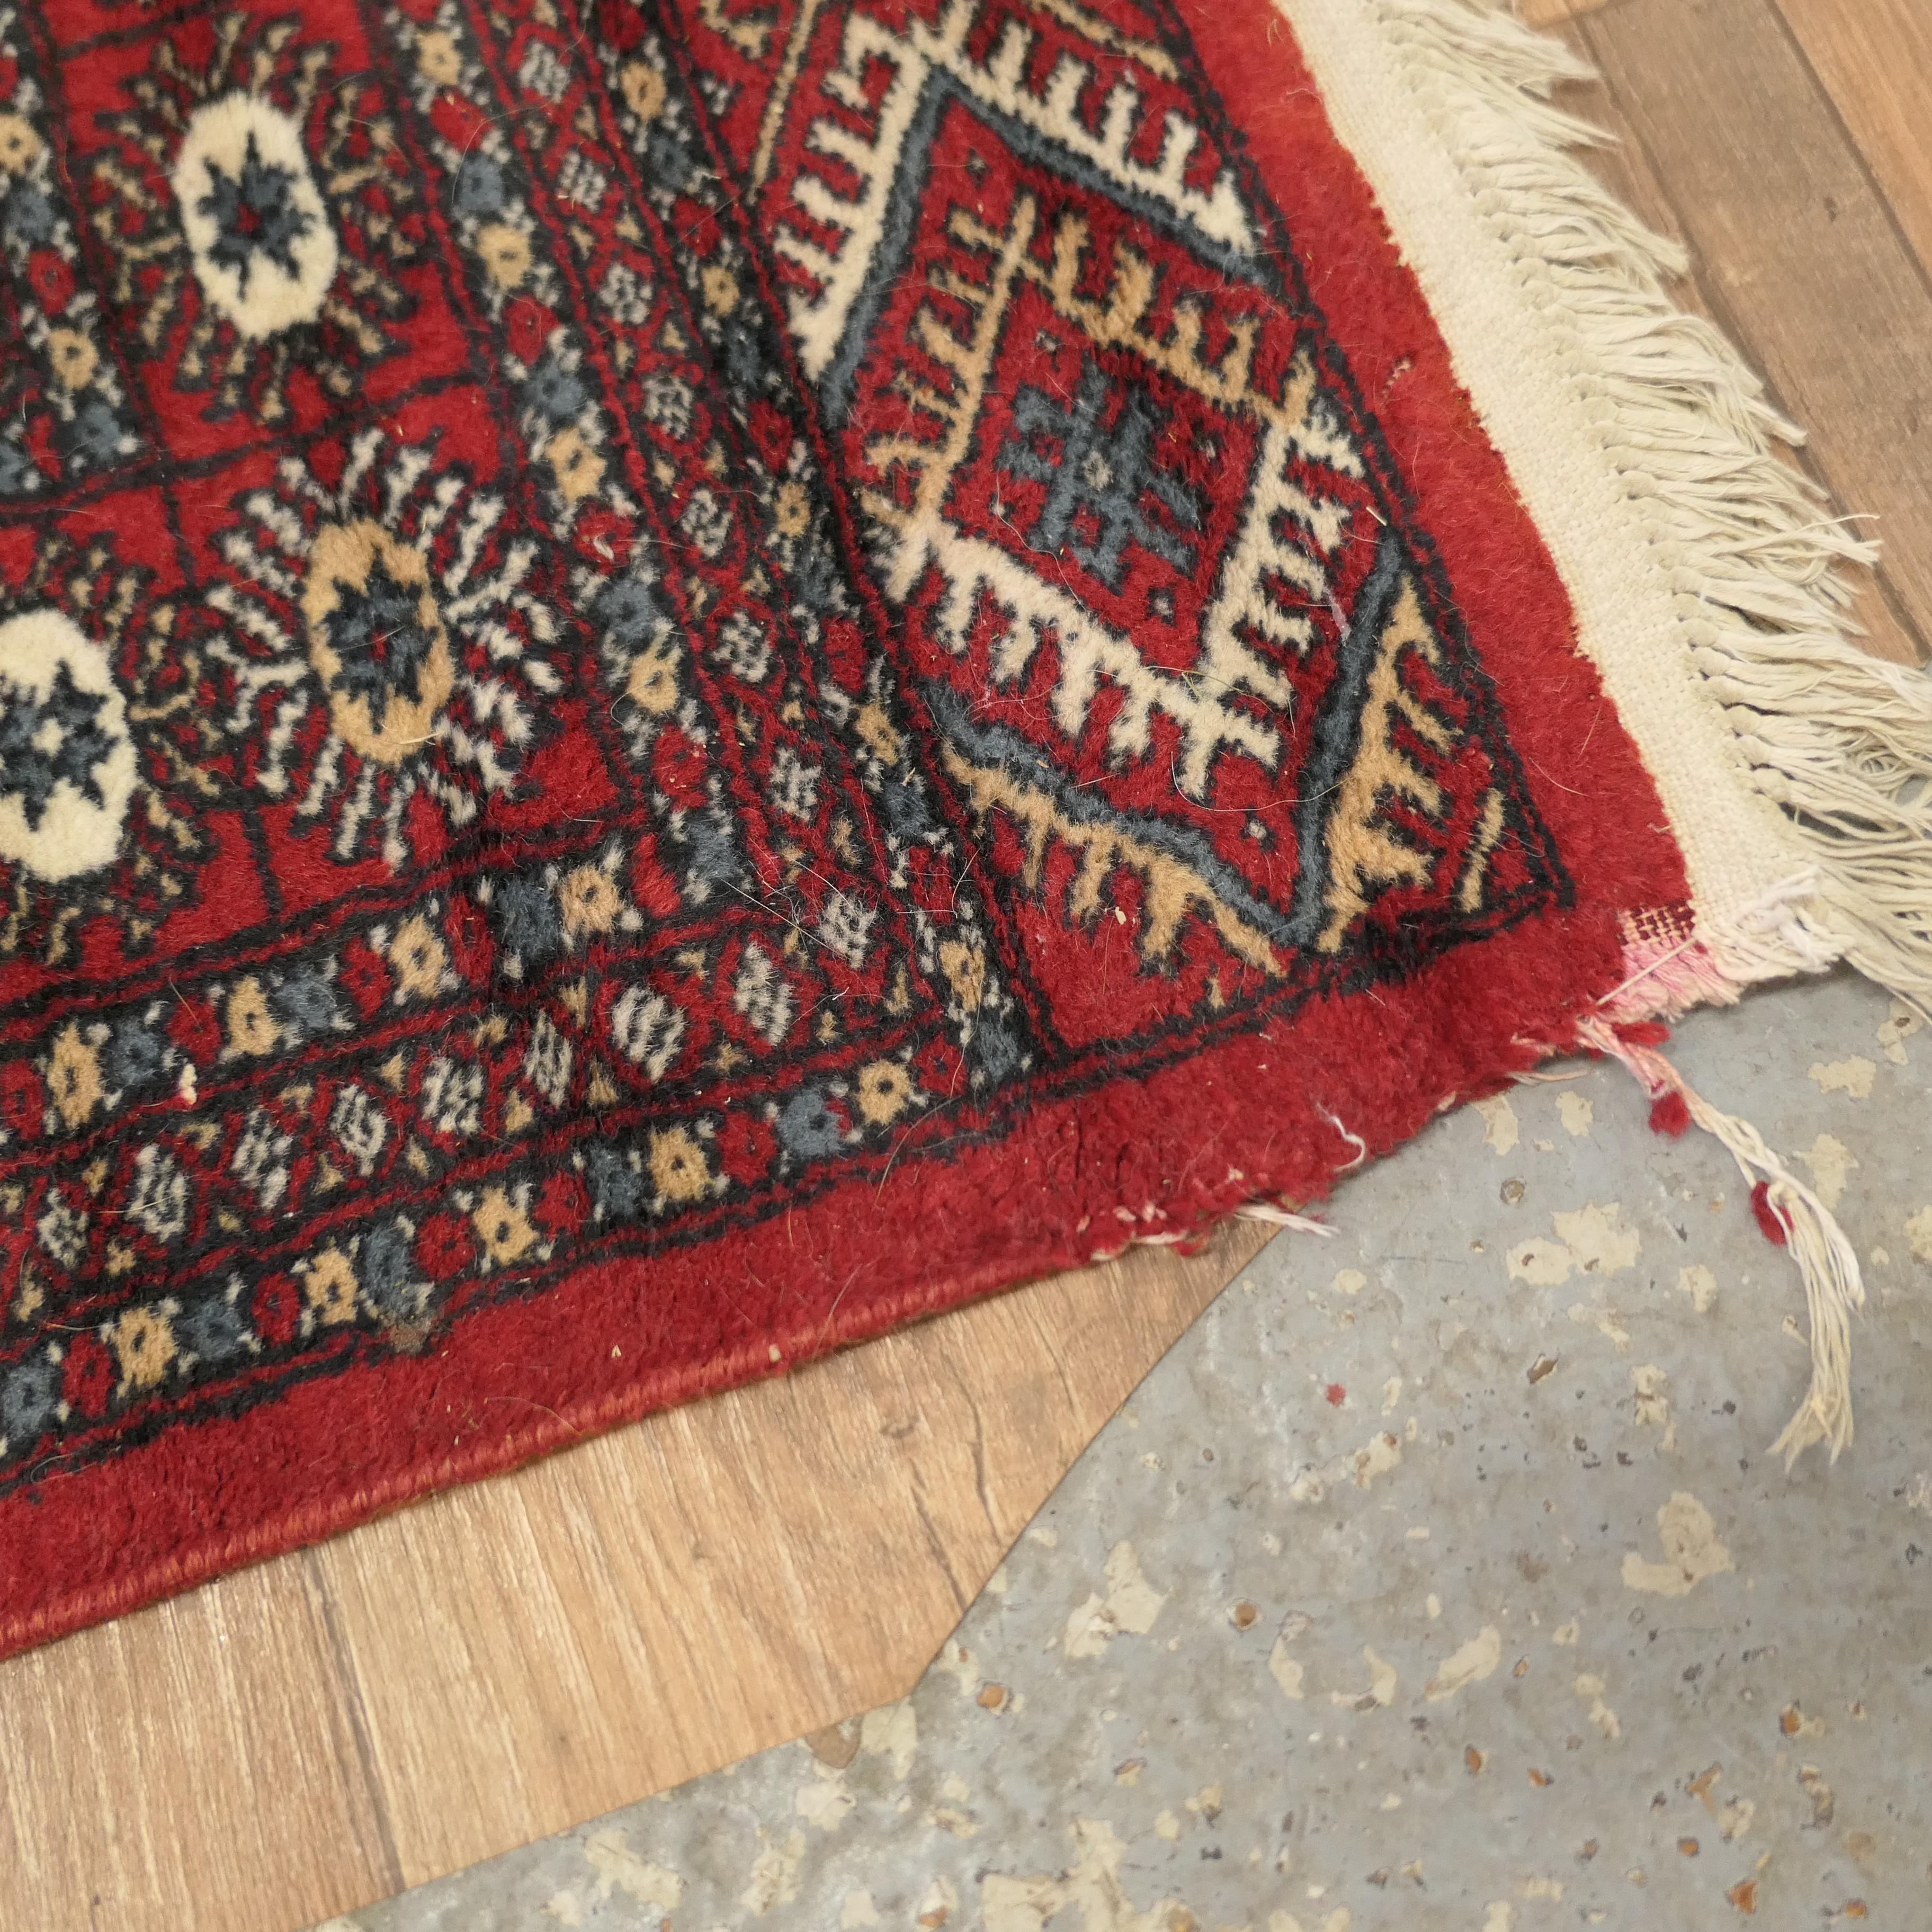 A Lovely Bright Red Wool Rug  The Carpet is a wonderful Bright colour   For Sale 5